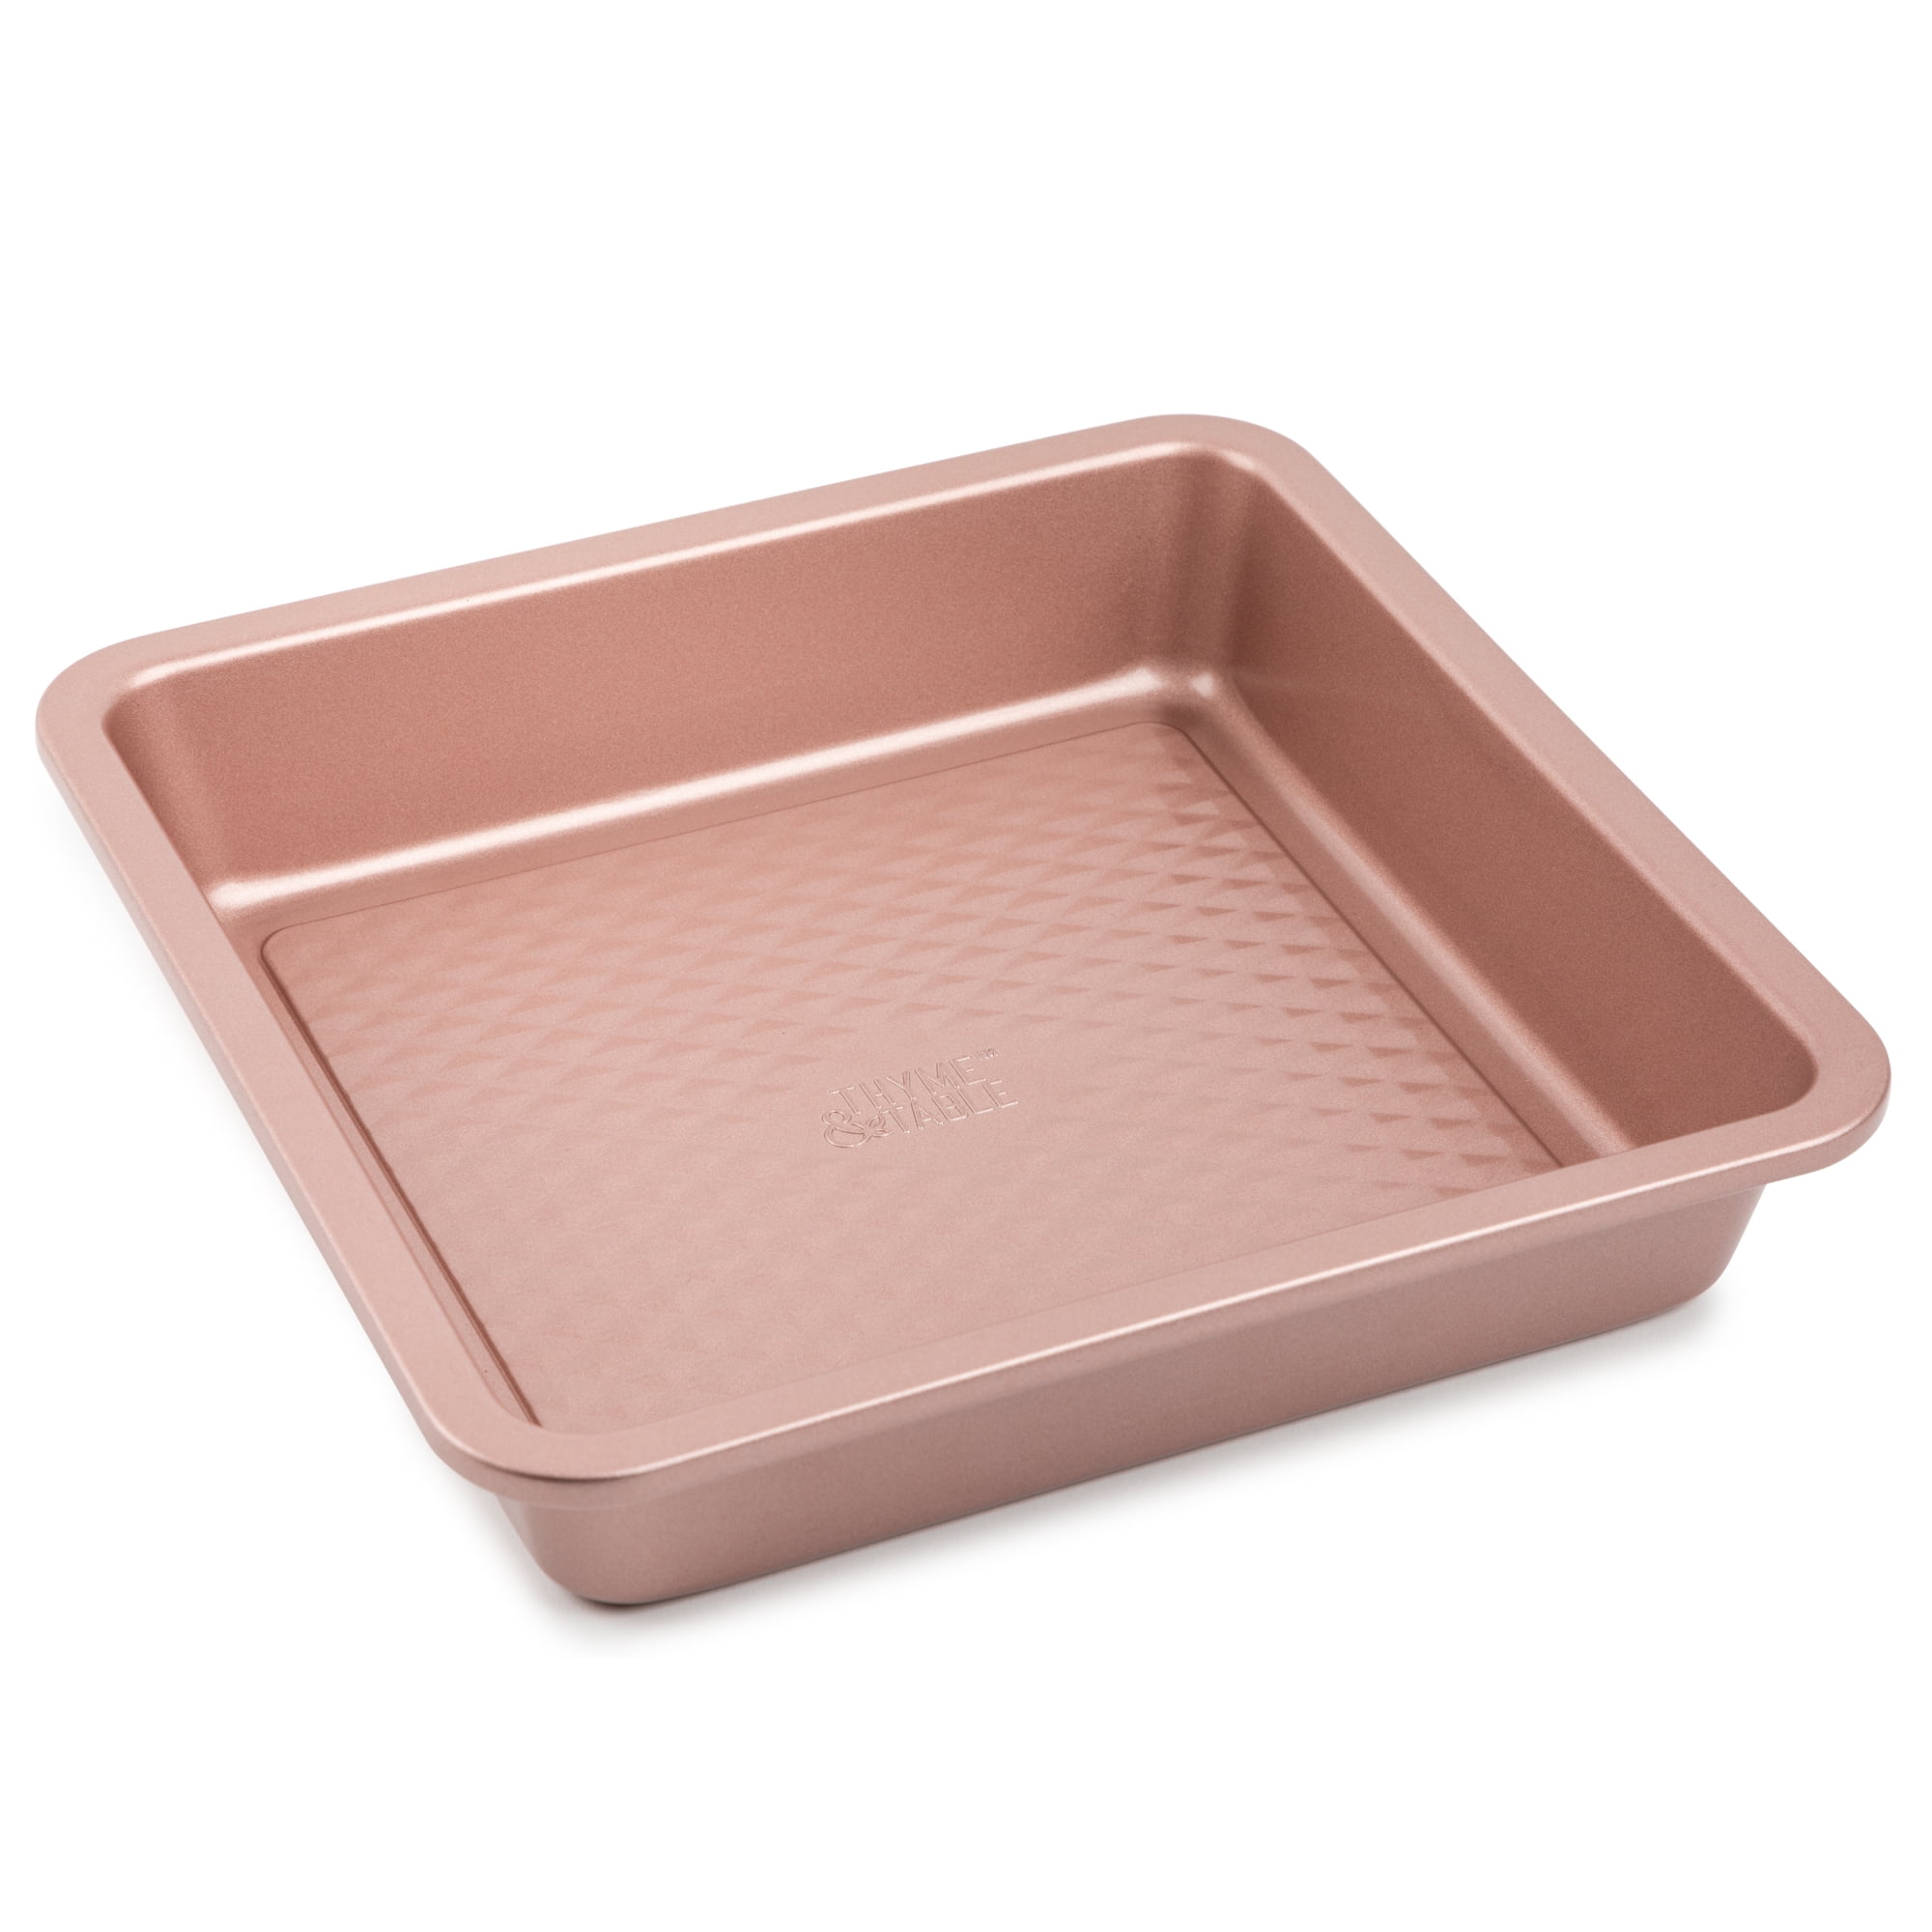 Thyme & Table Non-Stick Square Cake Pan, 9 Inch, Rose Gold